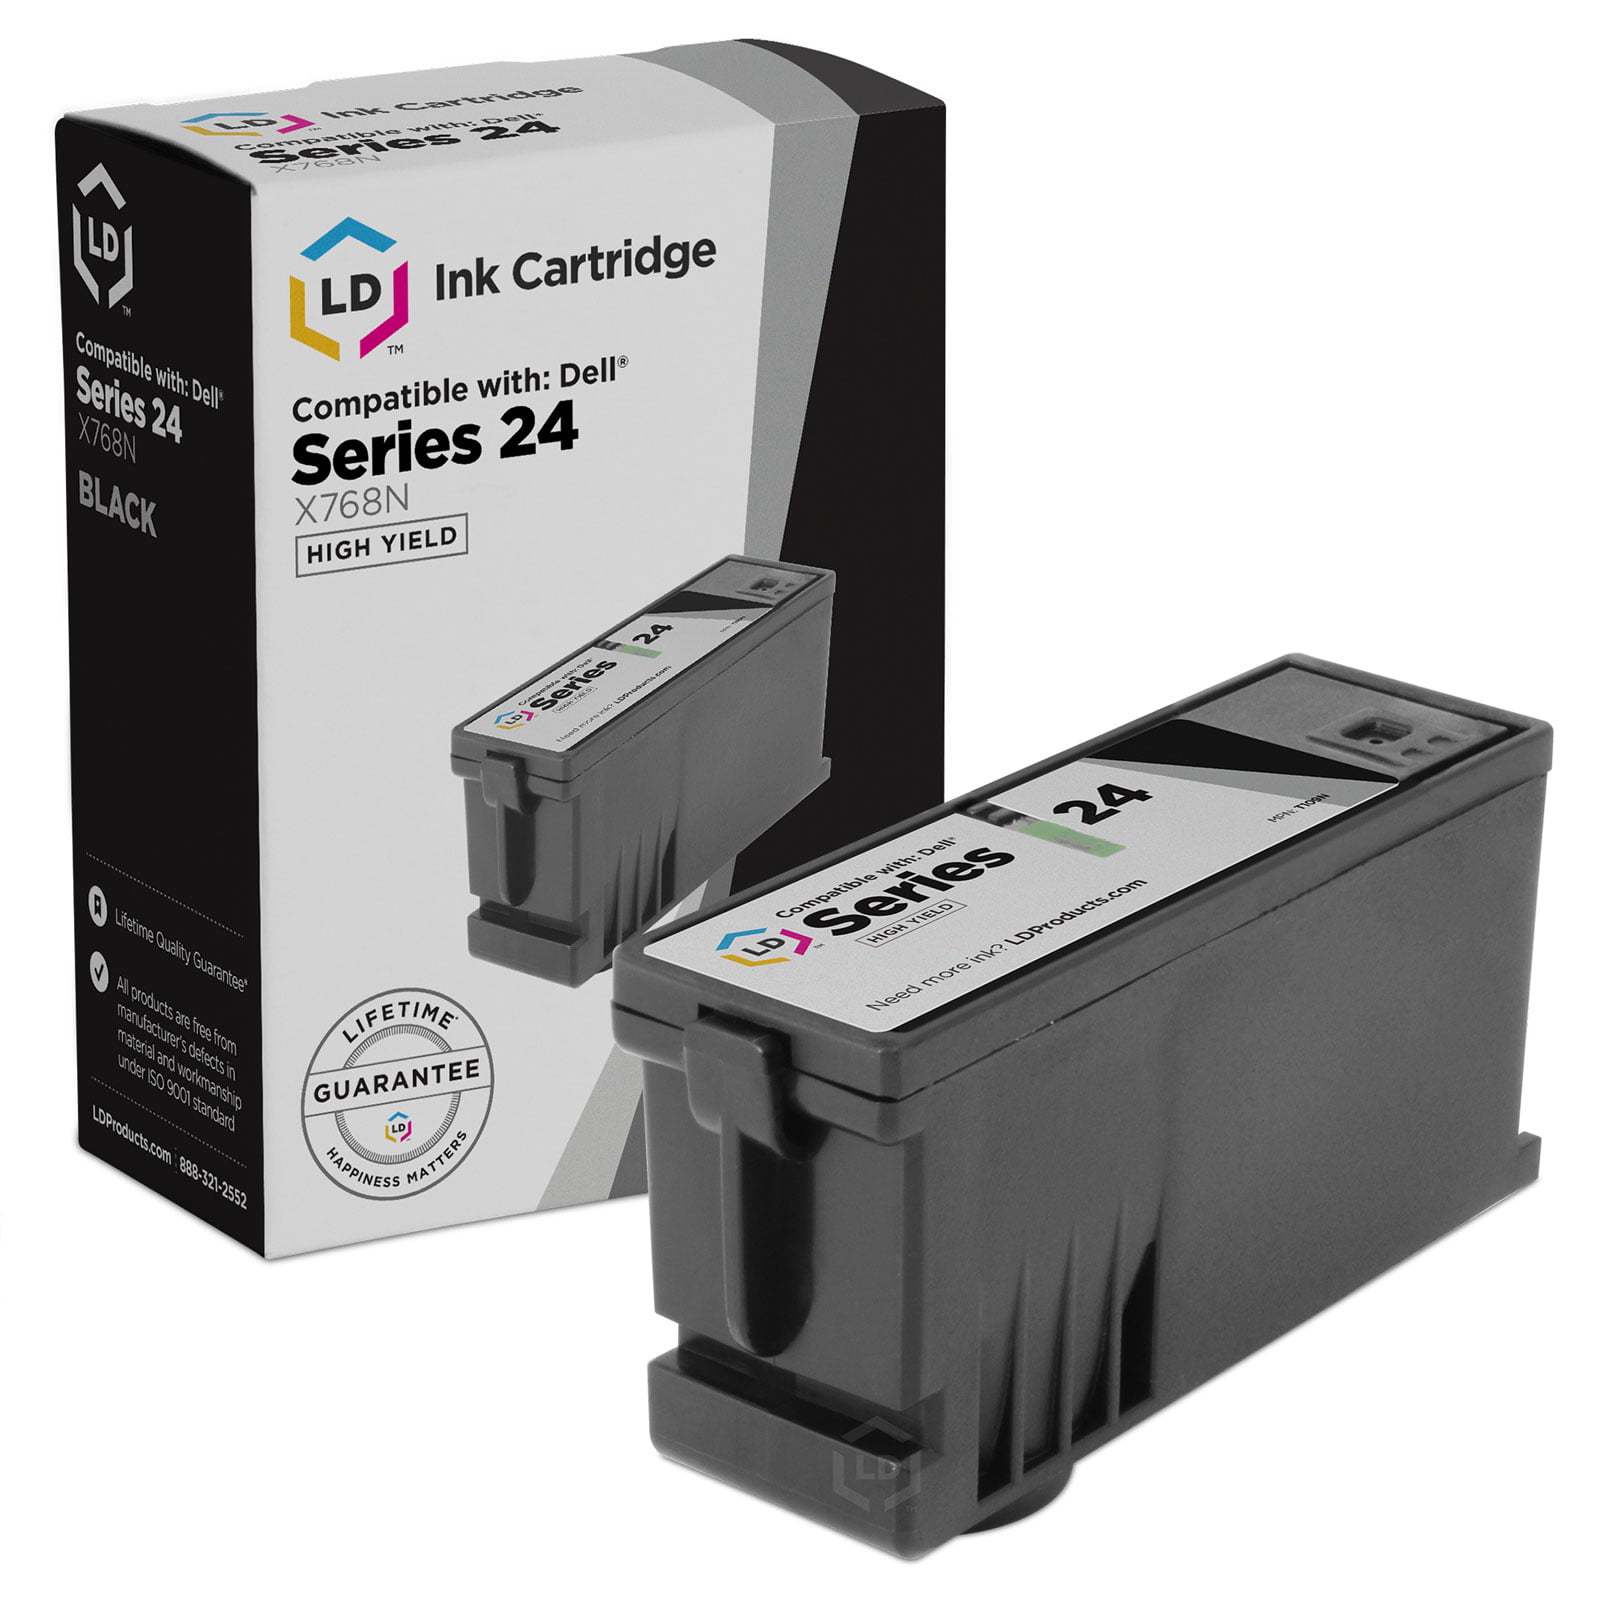 2 Black, 1 Color, 3-Pack LD Compatible Ink Cartridge Replacement for Dell Series 24 High Yield 